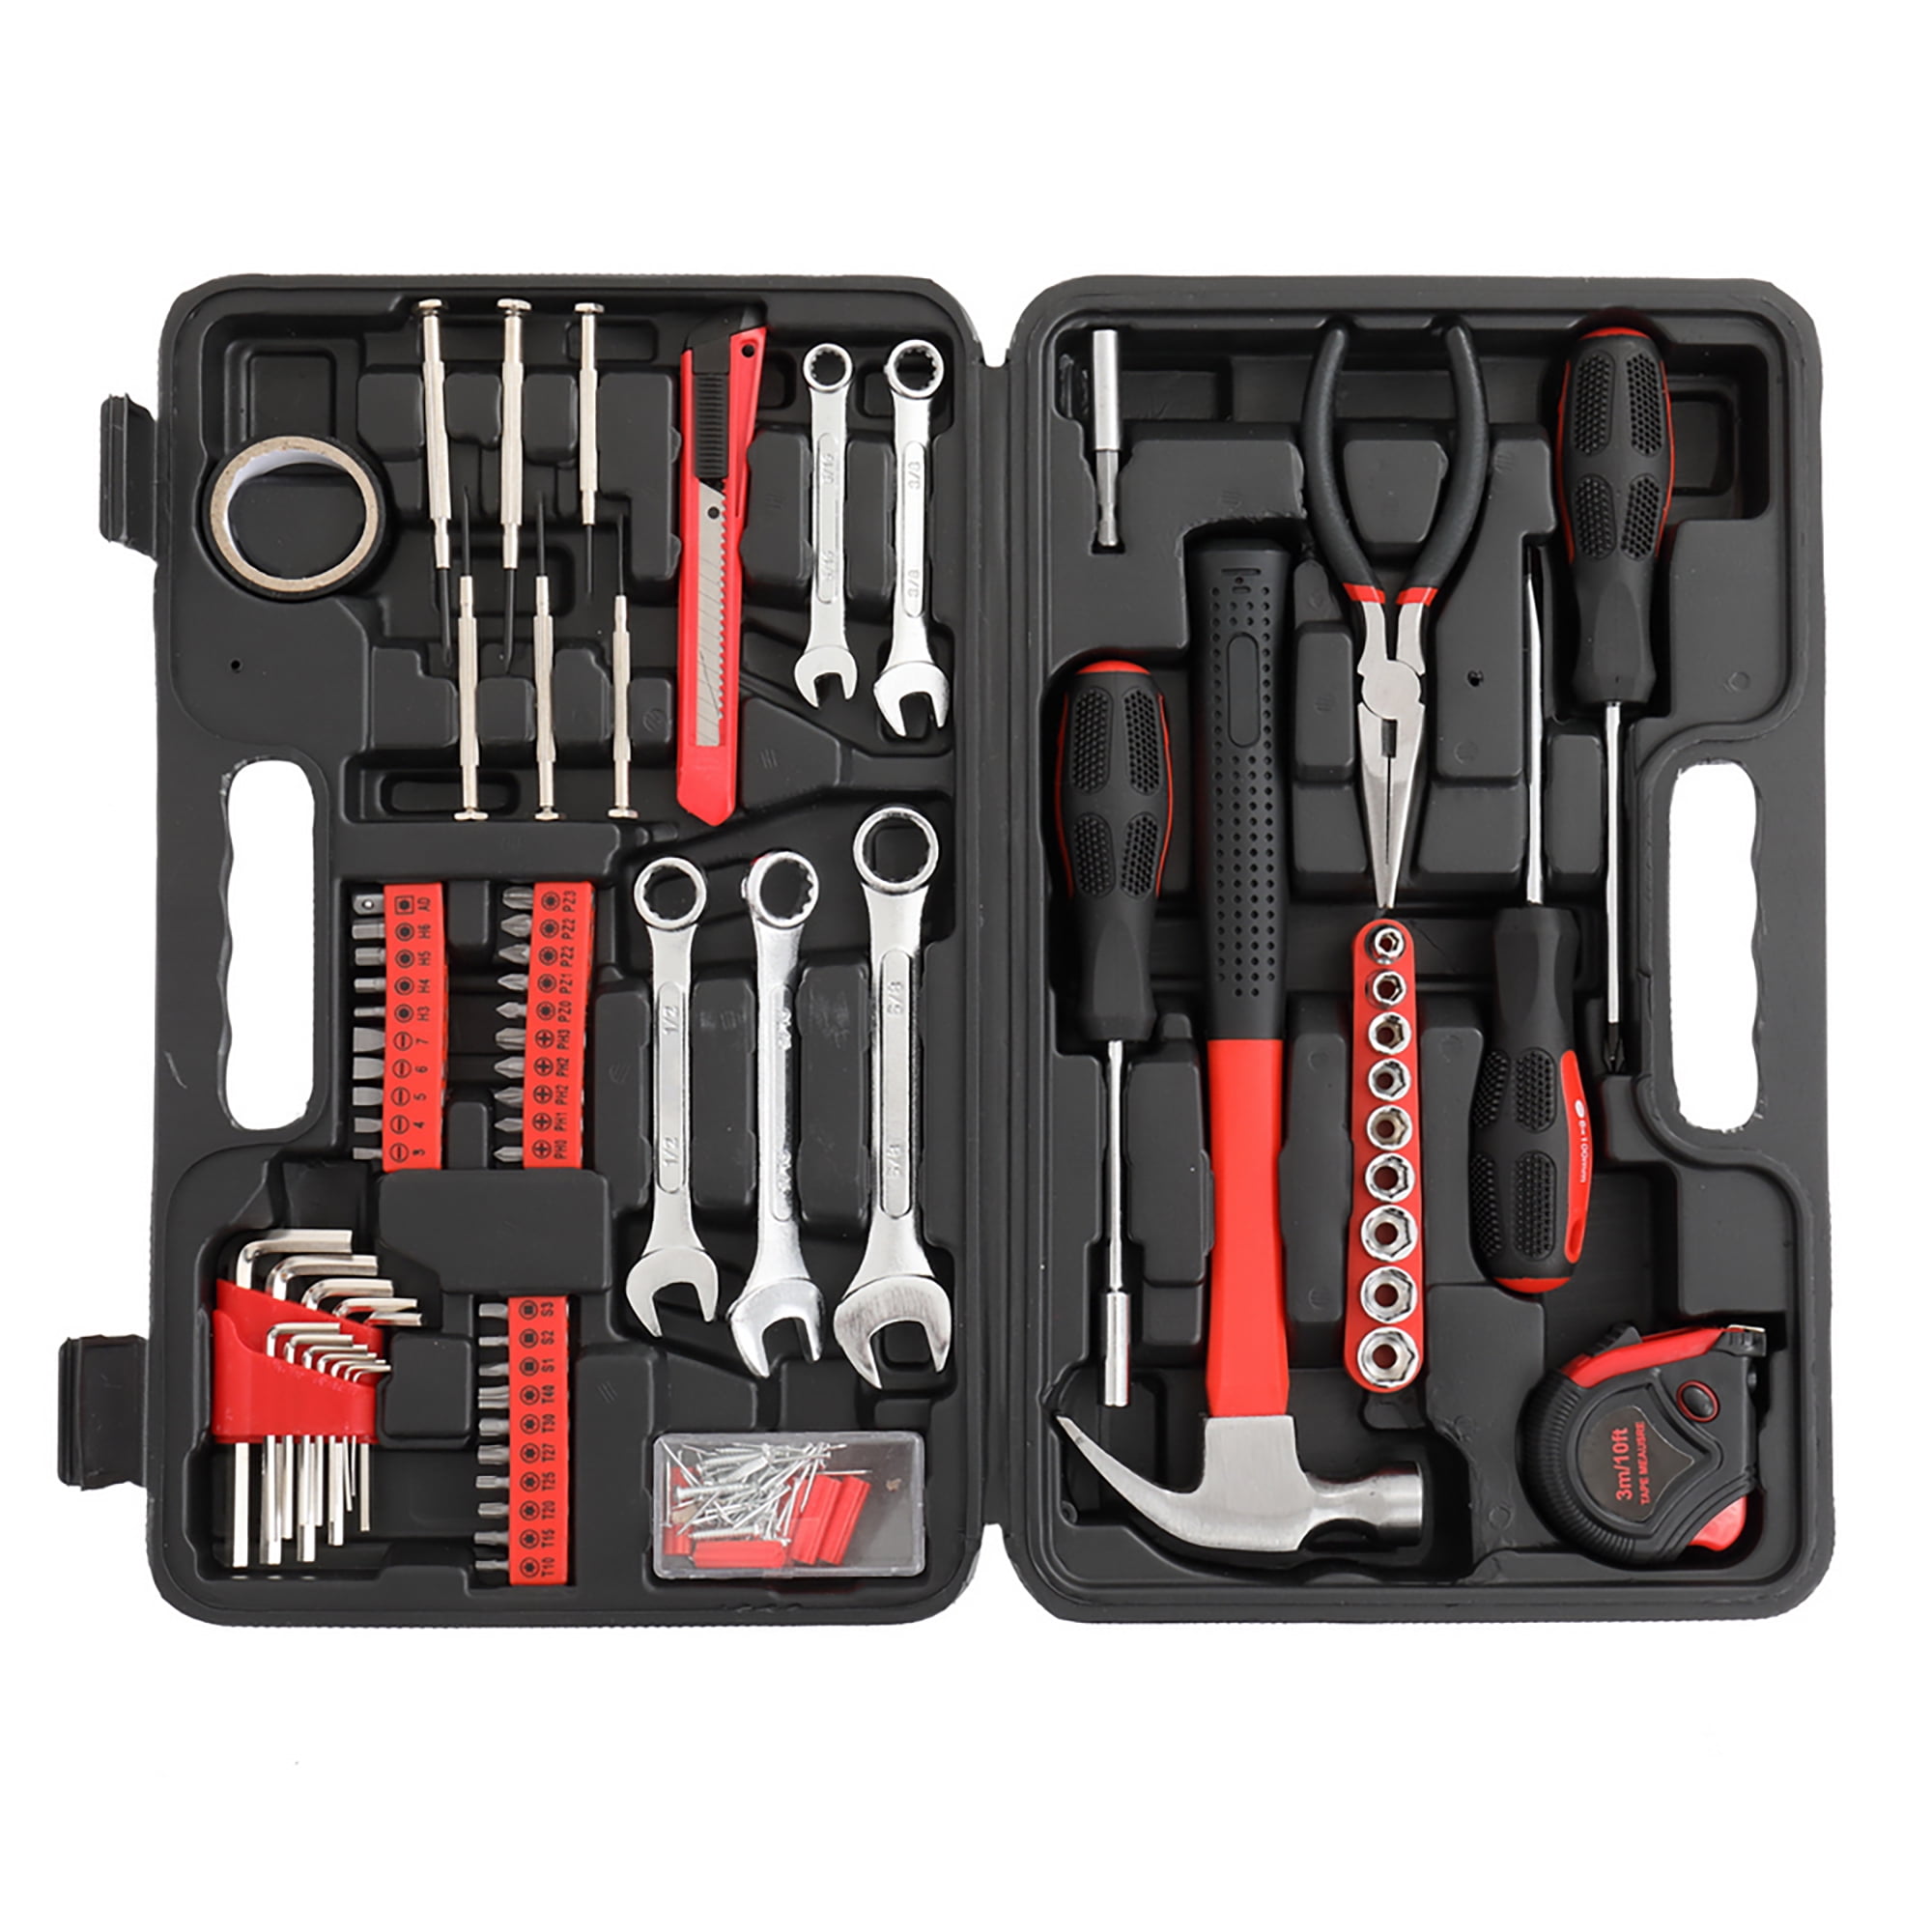 Portable Tool Kit - Includes Soldering Iron, Solder, Wire Stripper